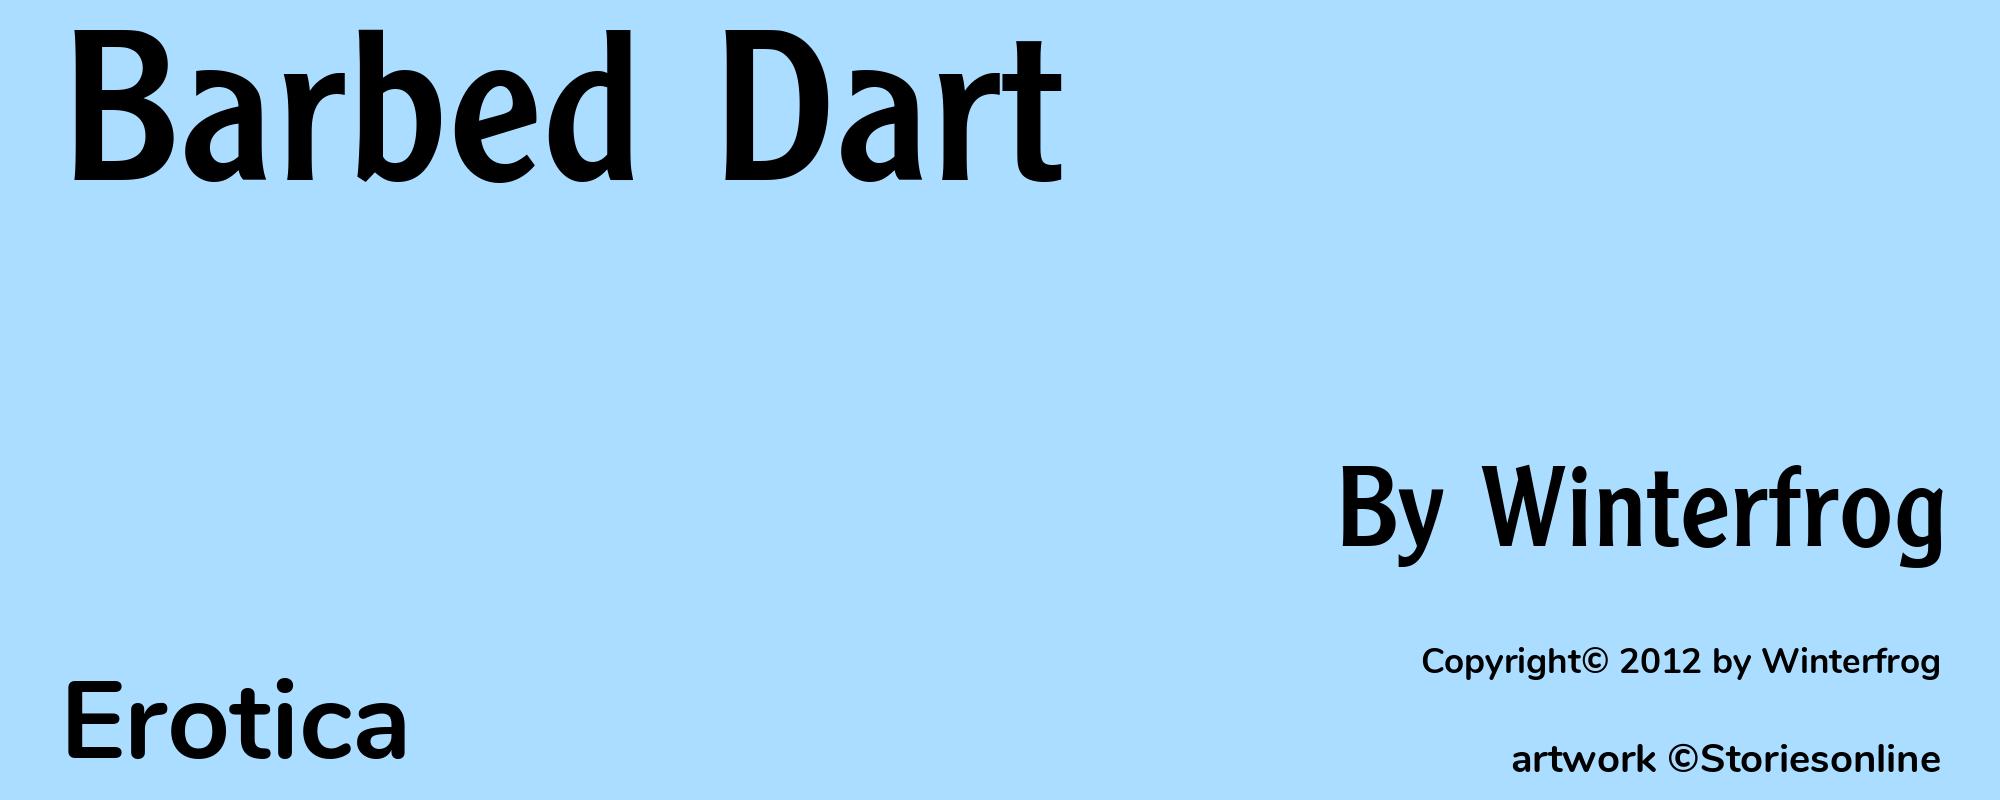 Barbed Dart - Cover